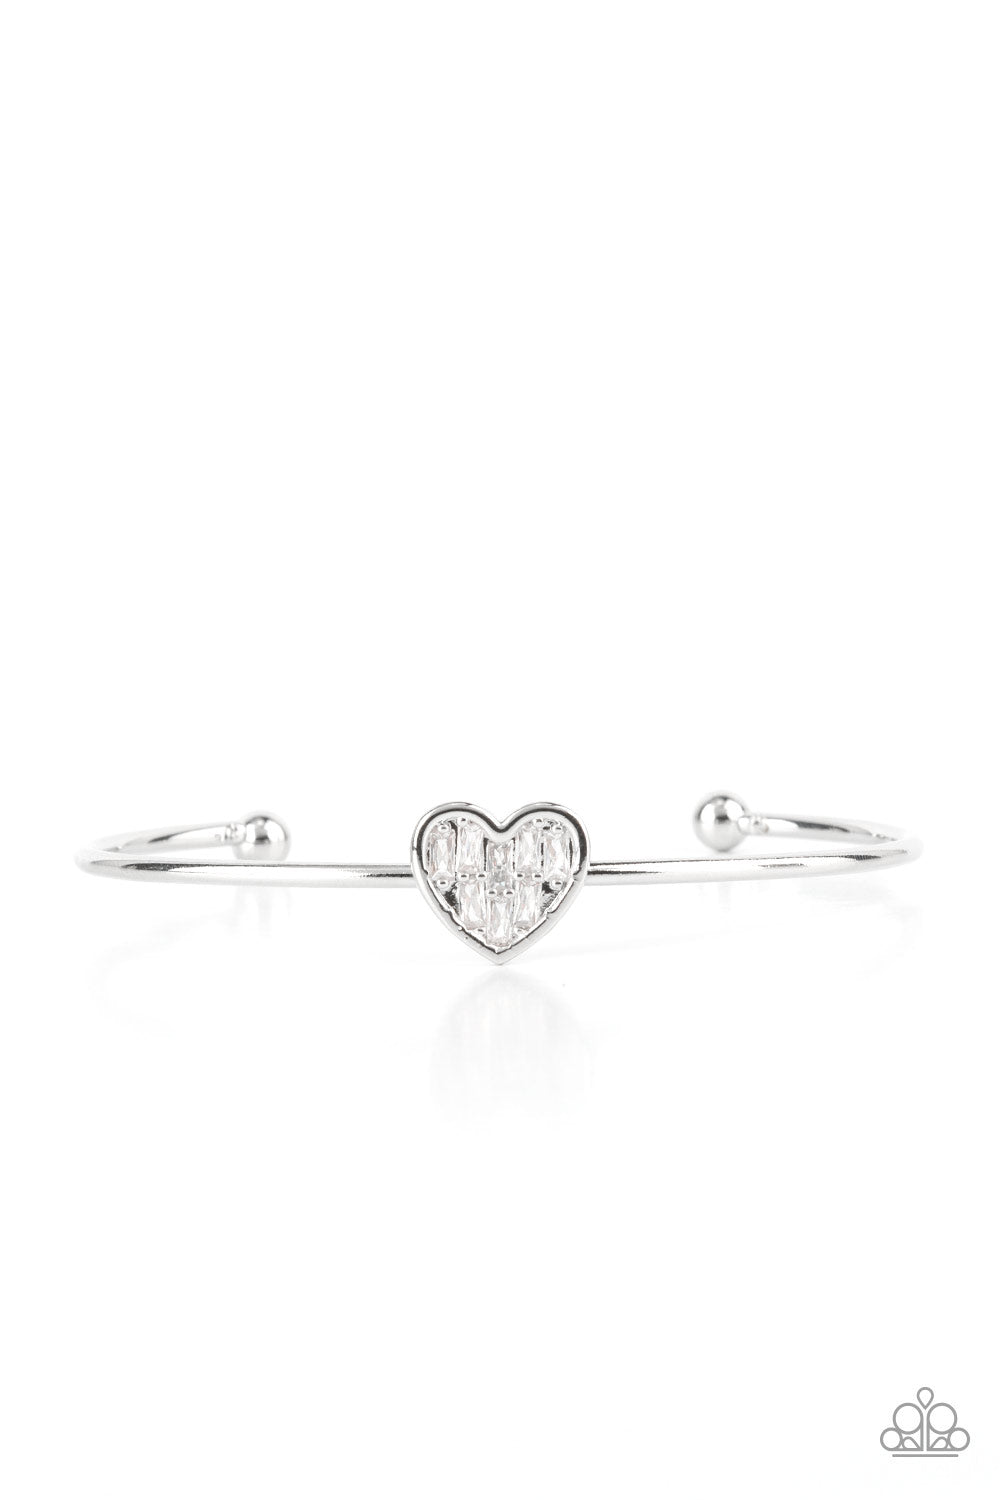 Heart of Ice White Cuff Bracelet - Paparazzi Accessories  Brimming with dainty emerald-cut white rhinestones, a simple silver heart frame sits atop a classic silver bar curved into a simple cuff bracelet for a whimsical display across the wrist.  Sold as one individual bracelet.